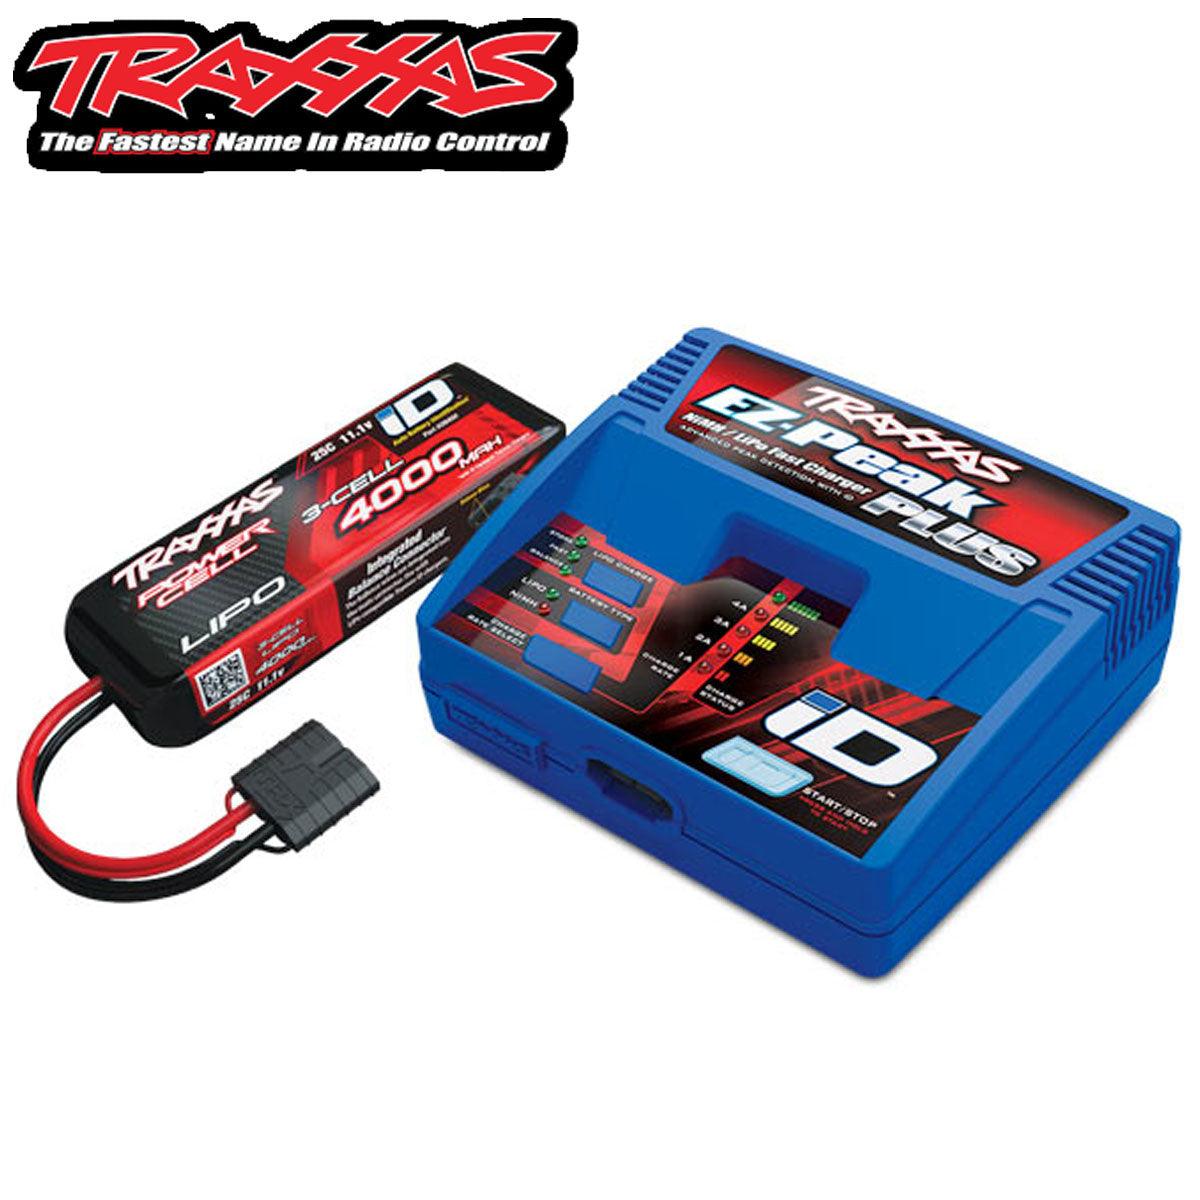 Traxxas 2994 Lipo Battery /ID Charger Completer Pack TRX-4 Stampede Slash - PowerHobby